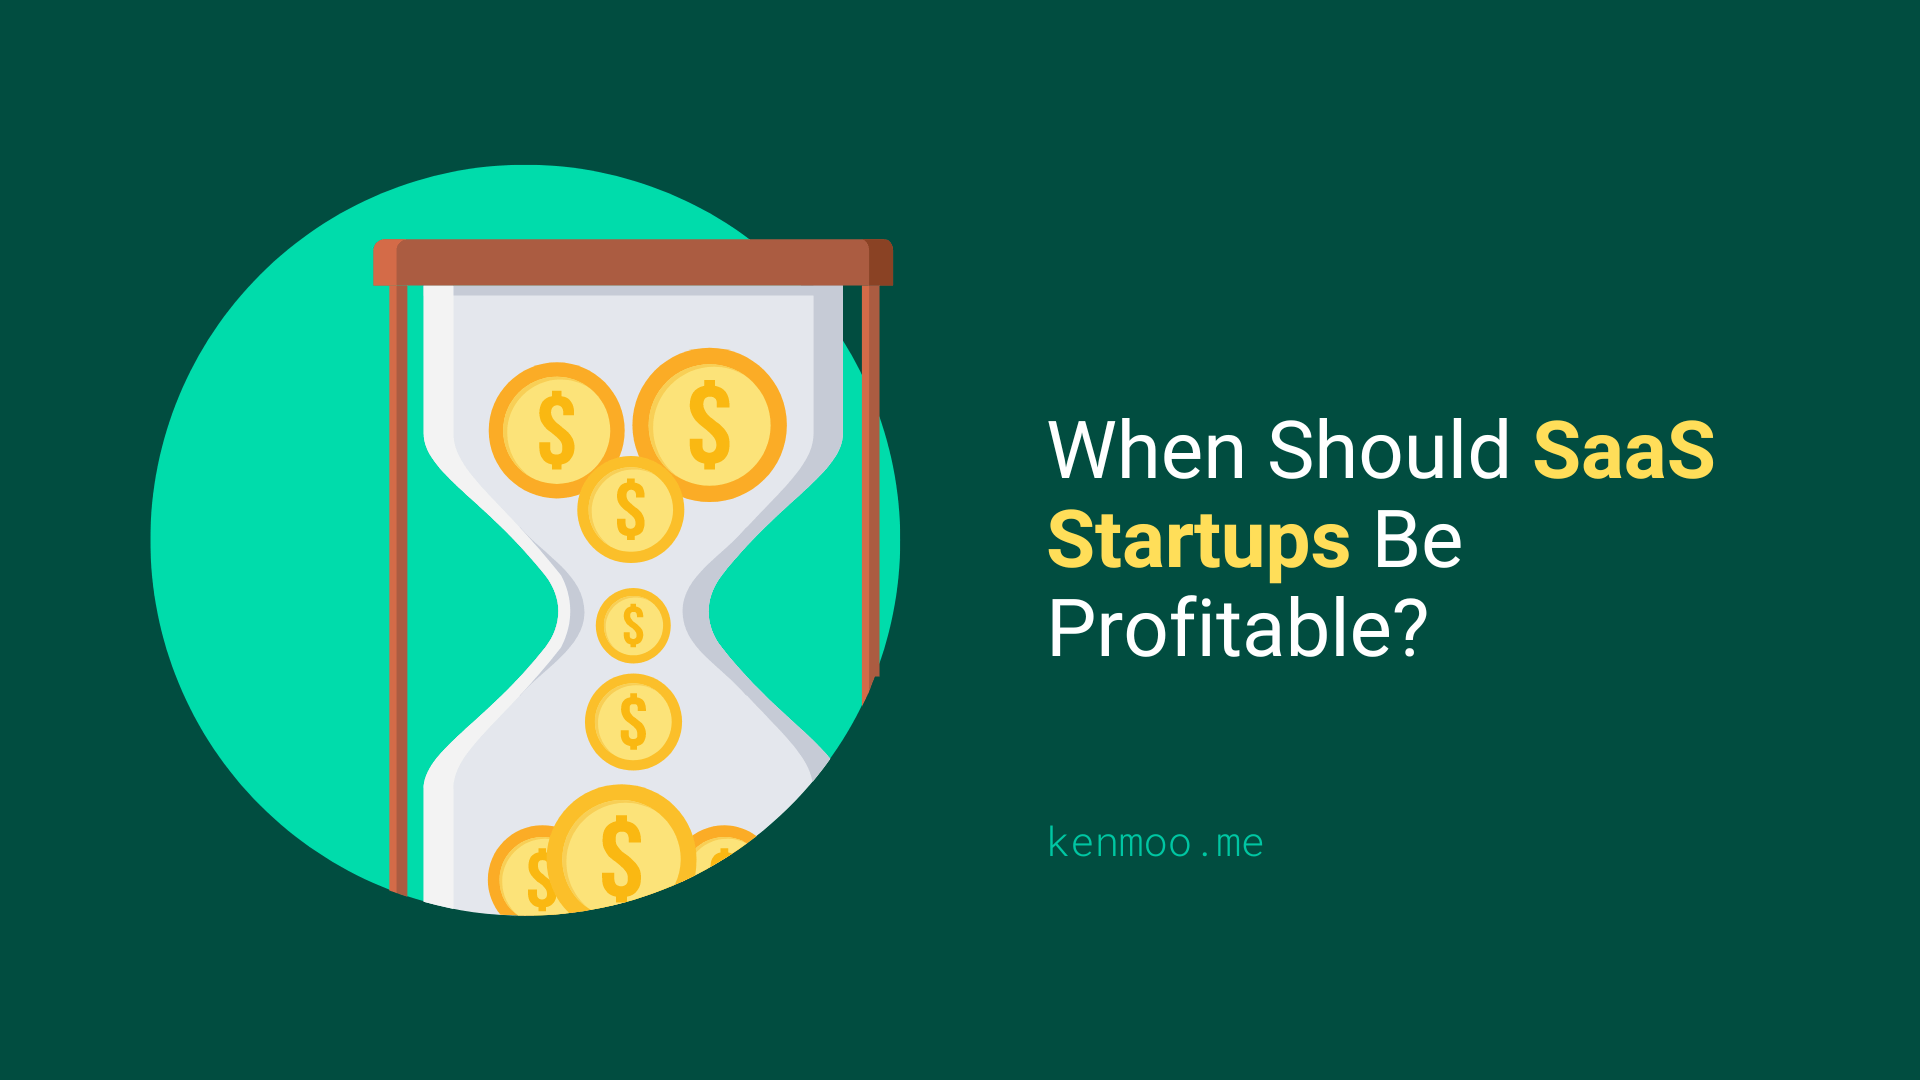 When Should SaaS Startups Be Profitable?